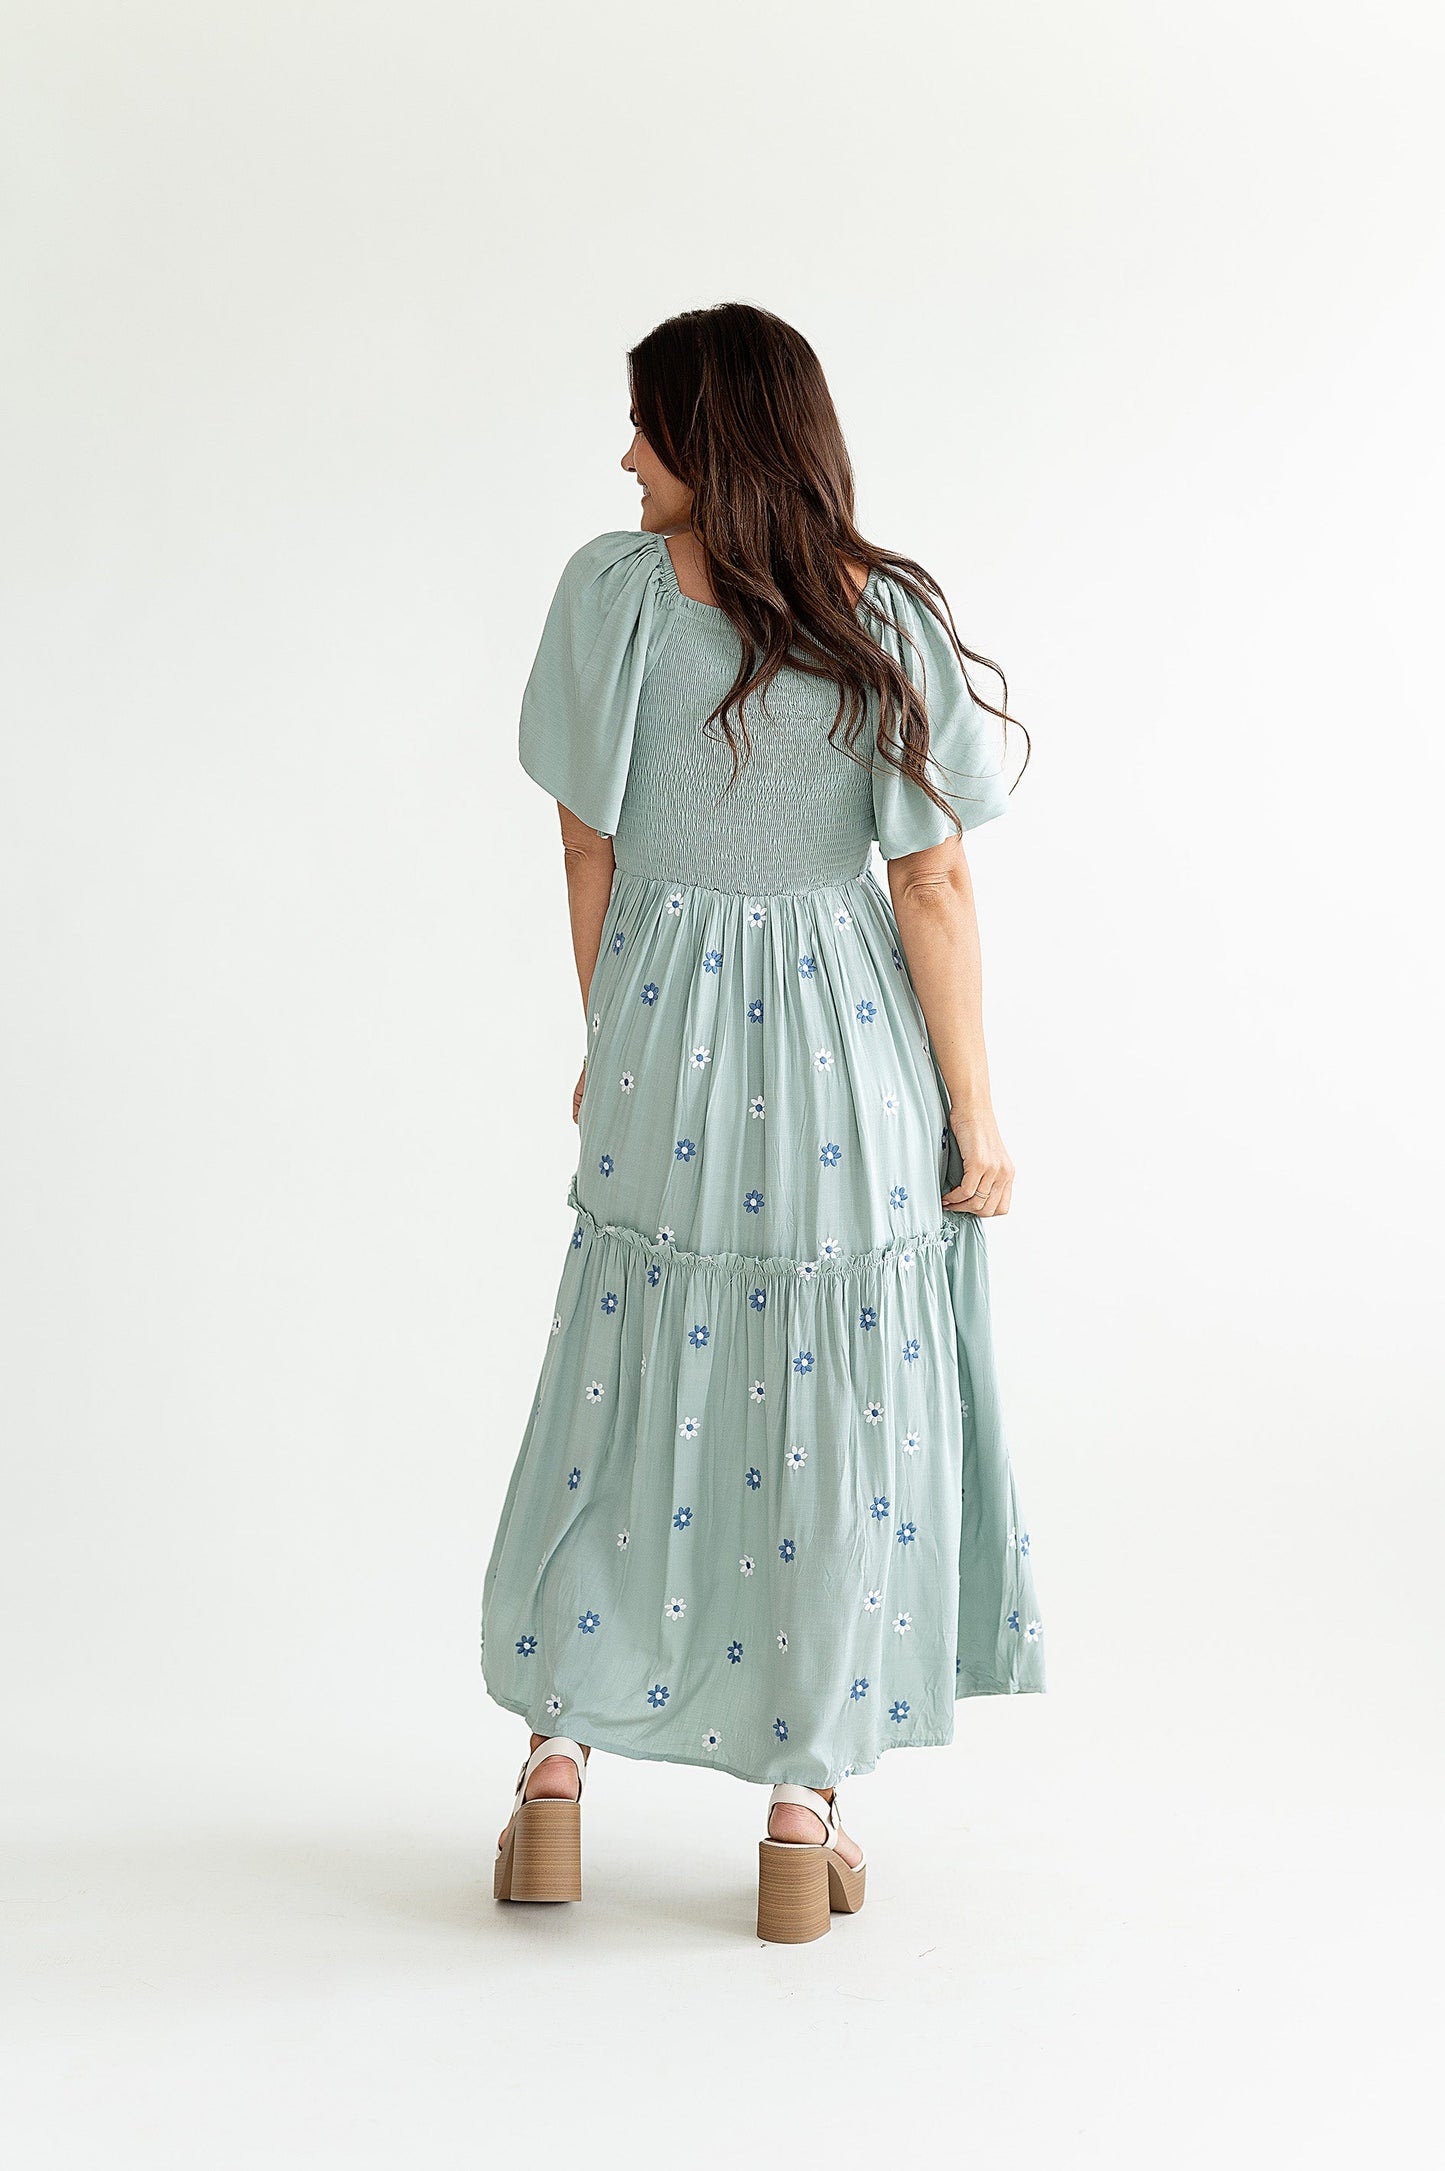 yayaq™-Clementine Embroidered Dress in Dusty Blue